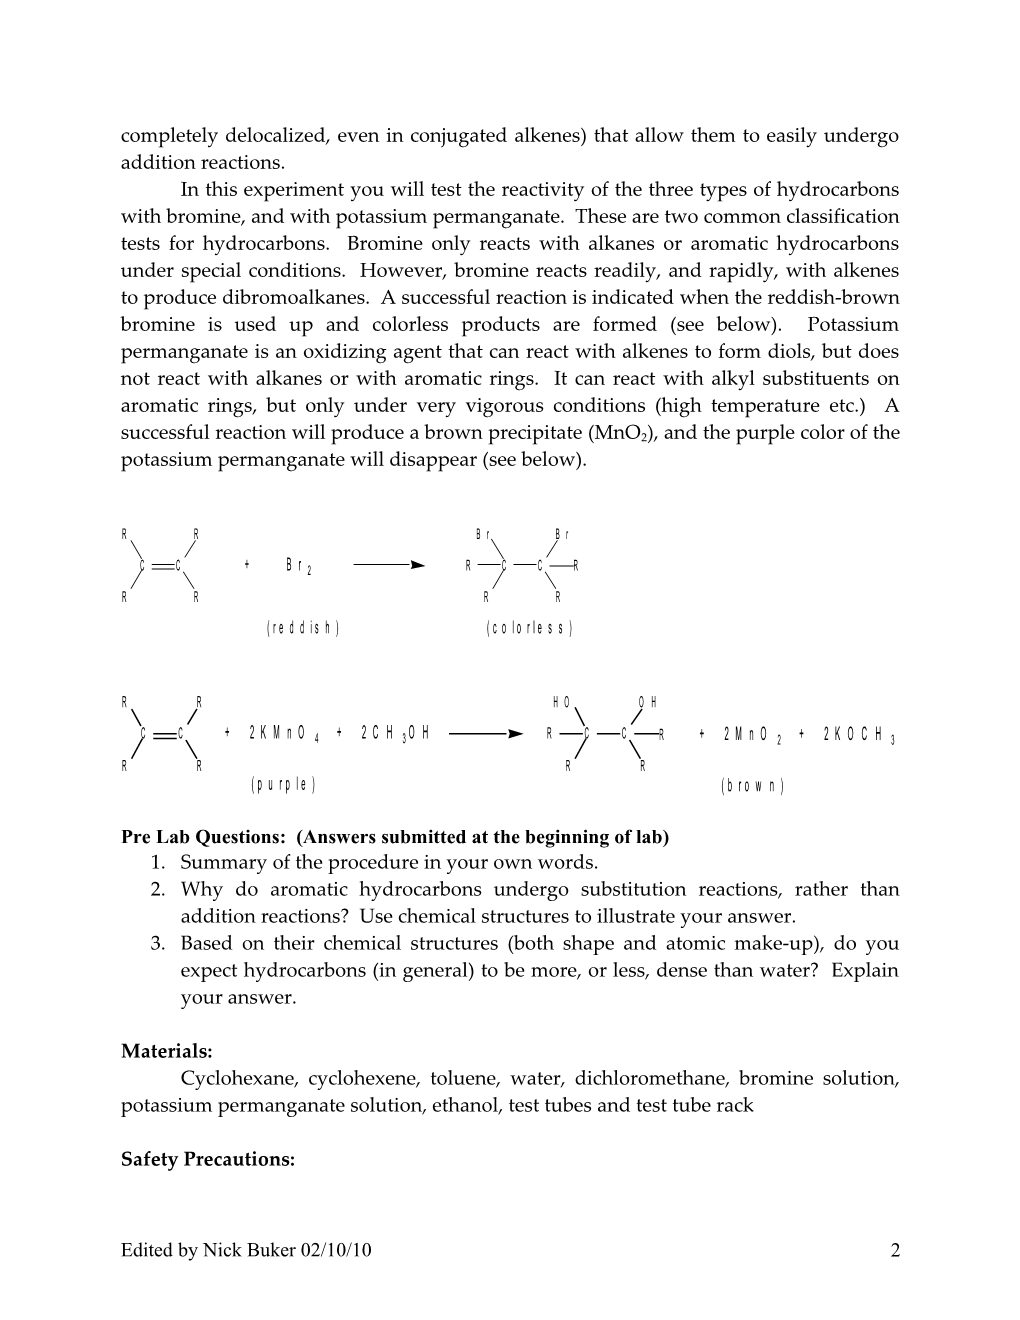 Experiment 1: Physical and Chemical Properties of Alkanes, Alkenes and Arenes